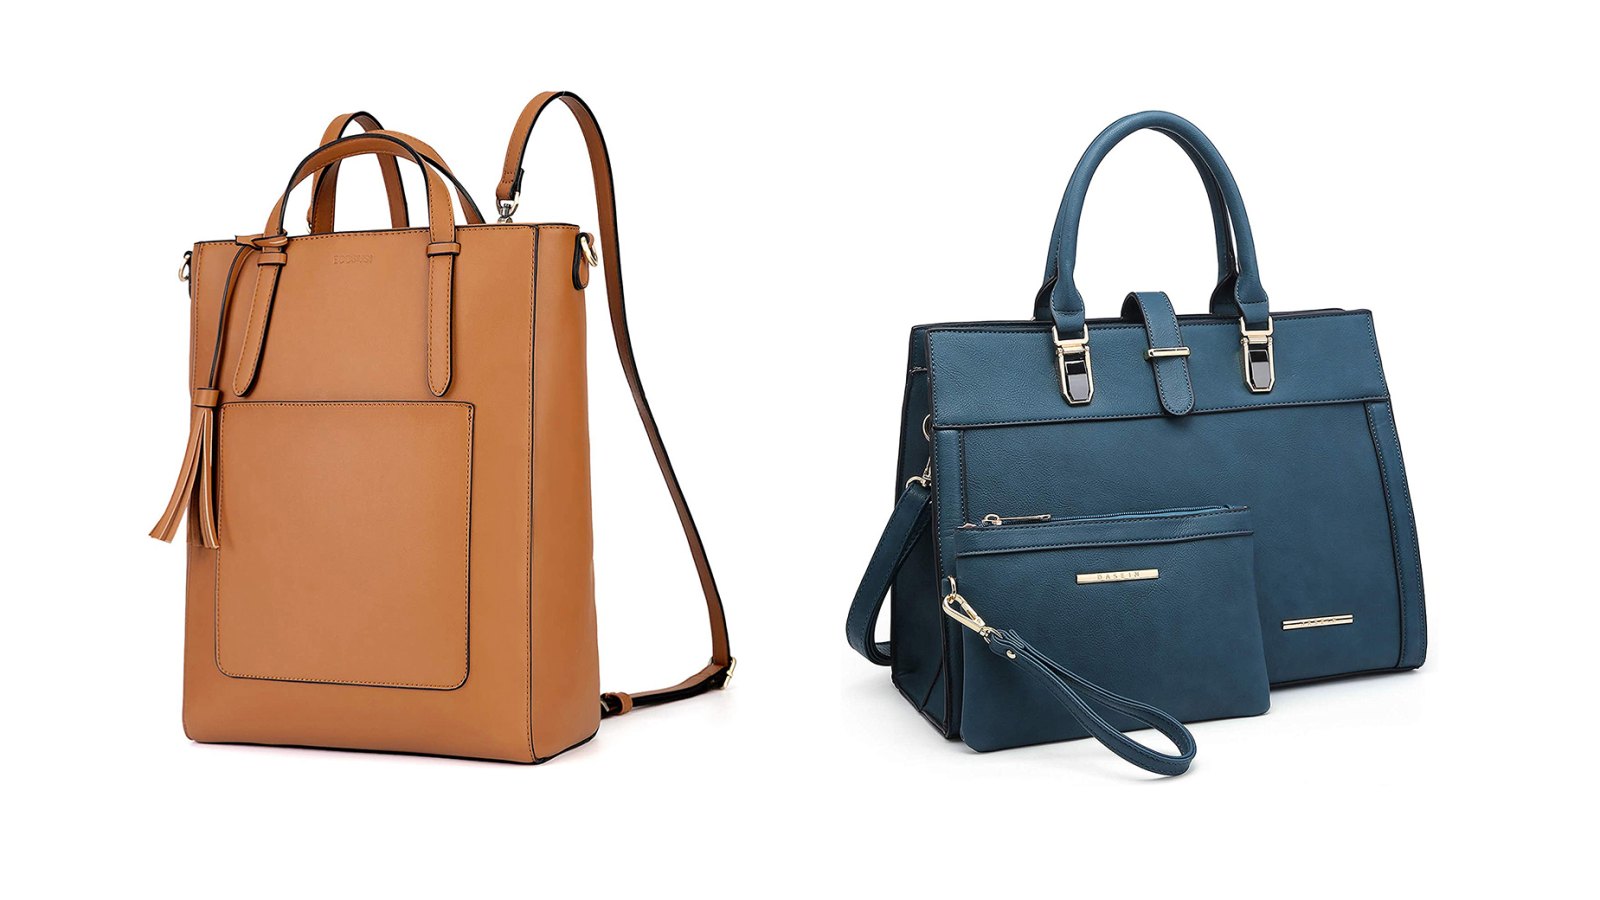 Work Bags and Backpacks That Will Wow on Your Commute — Under $50